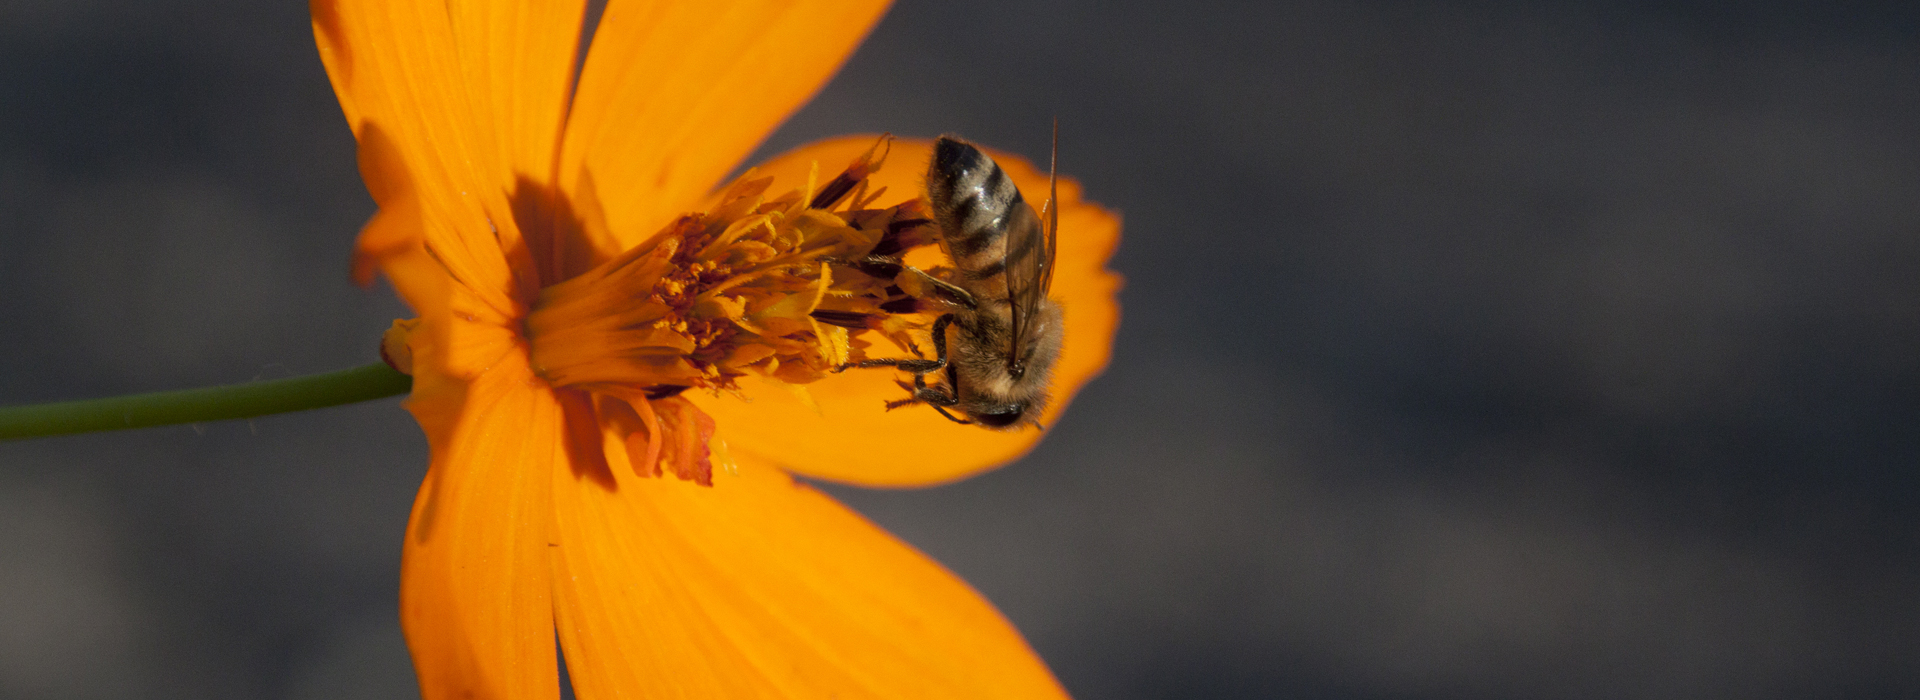 Bee collects pollen from a bright orange flower